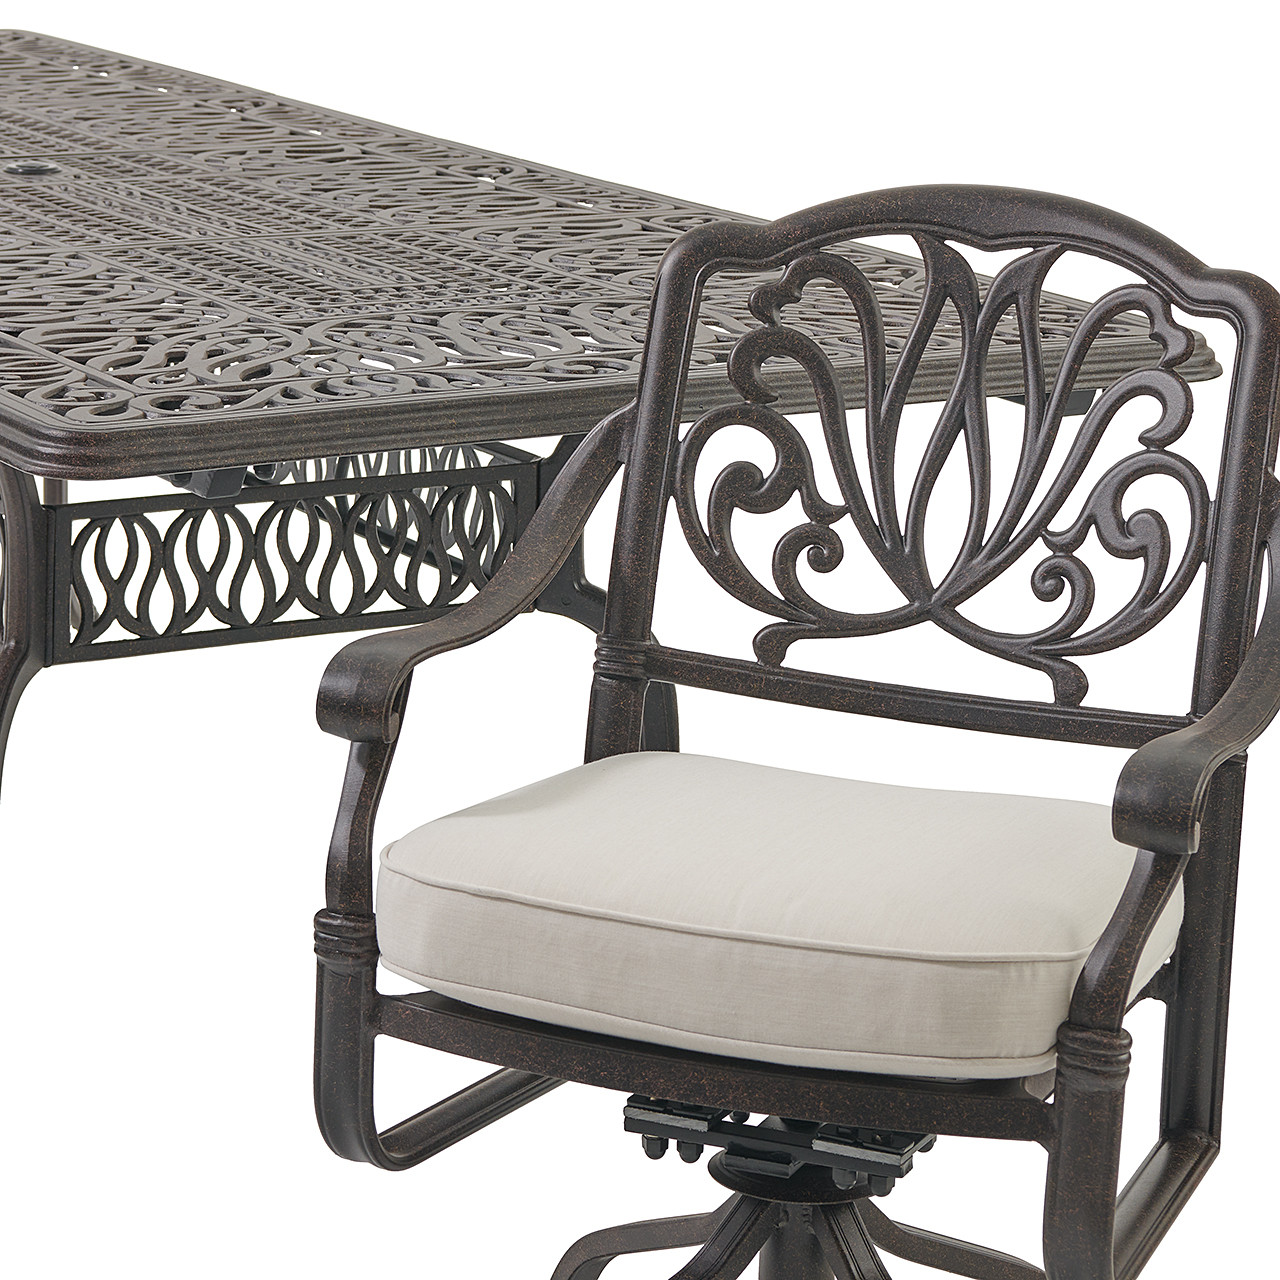 Cadiz Aged Bronze Cast Aluminum with Cushions 9 Piece Swivel Combo Dining Set + 71-103 x 44 in. Double Extension Table